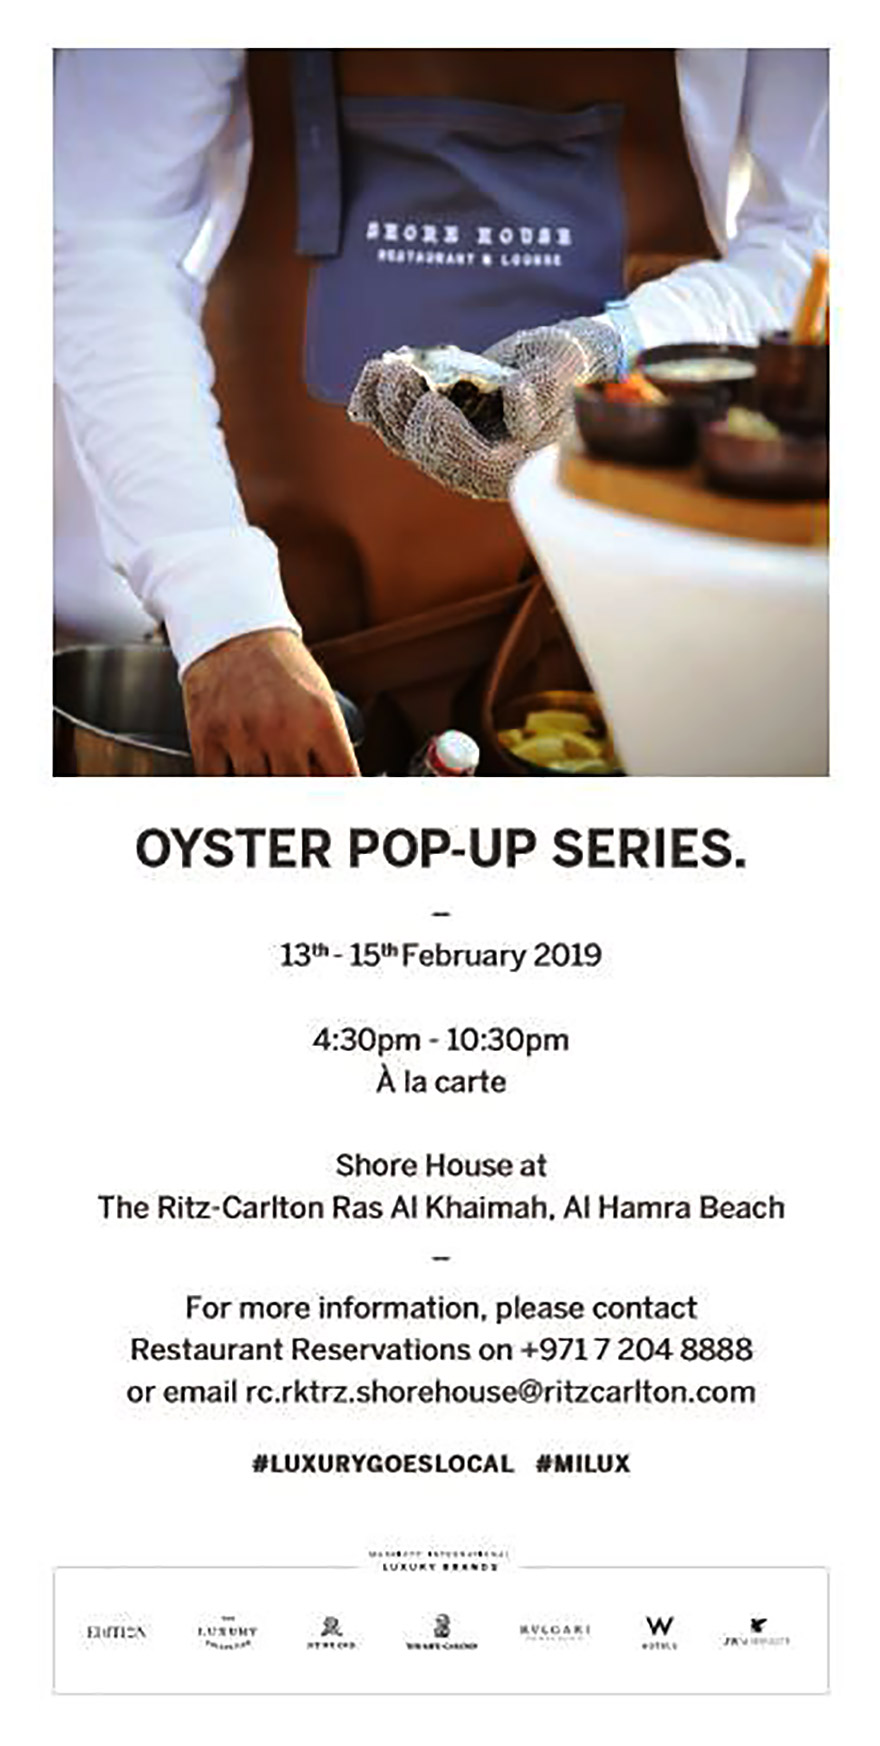 Oyster Pop-Up Series